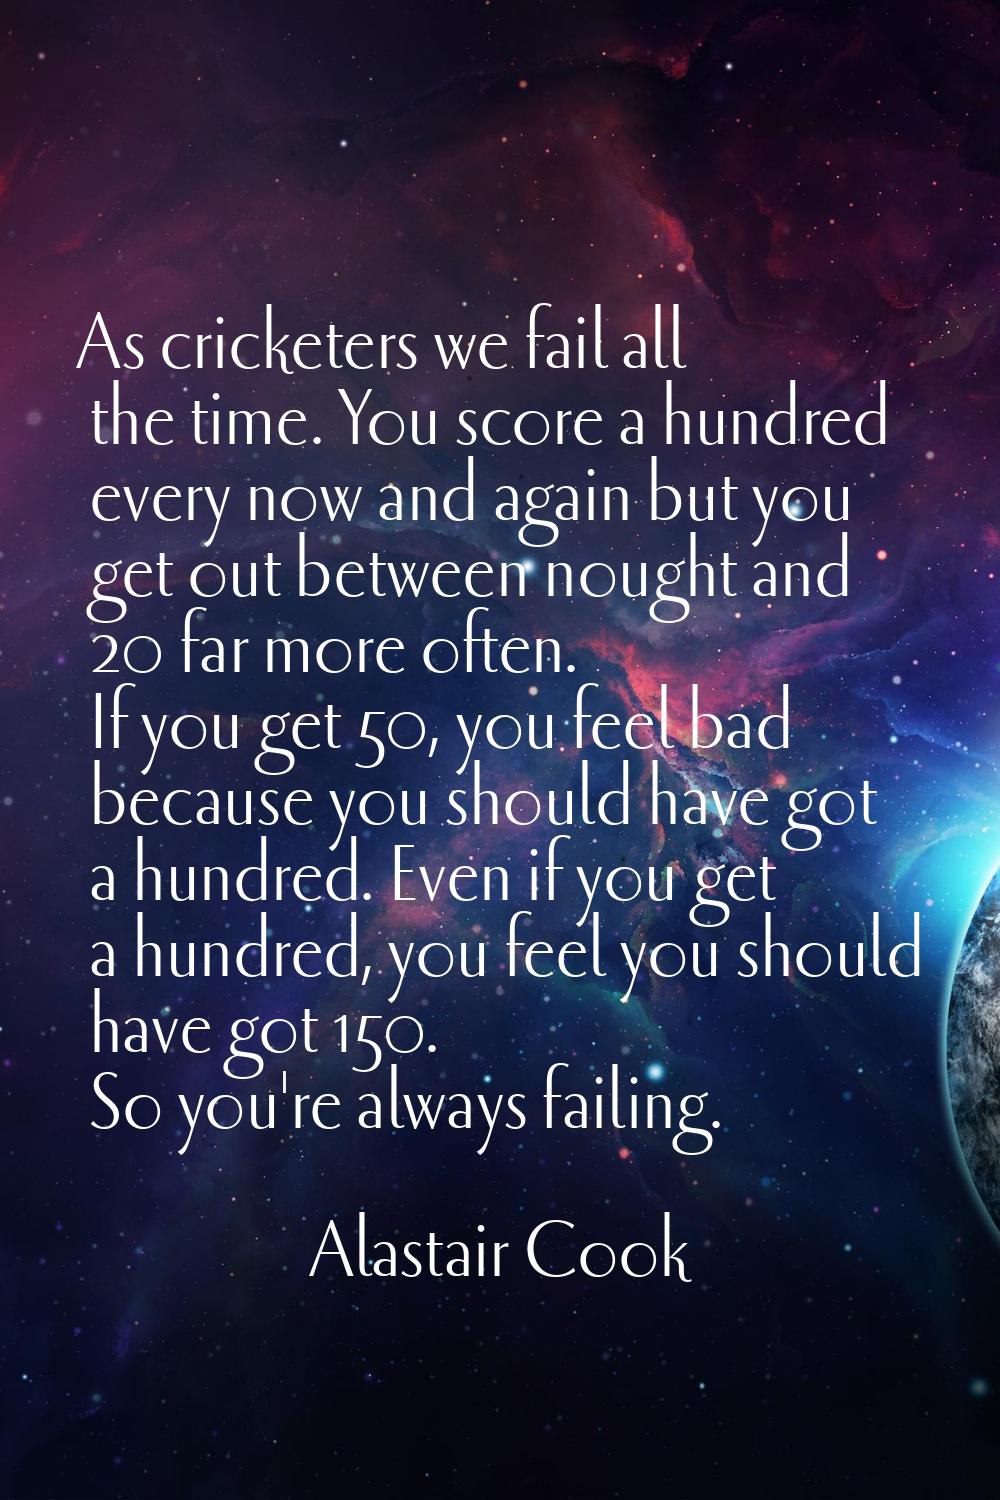 As cricketers we fail all the time. You score a hundred every now and again but you get out between